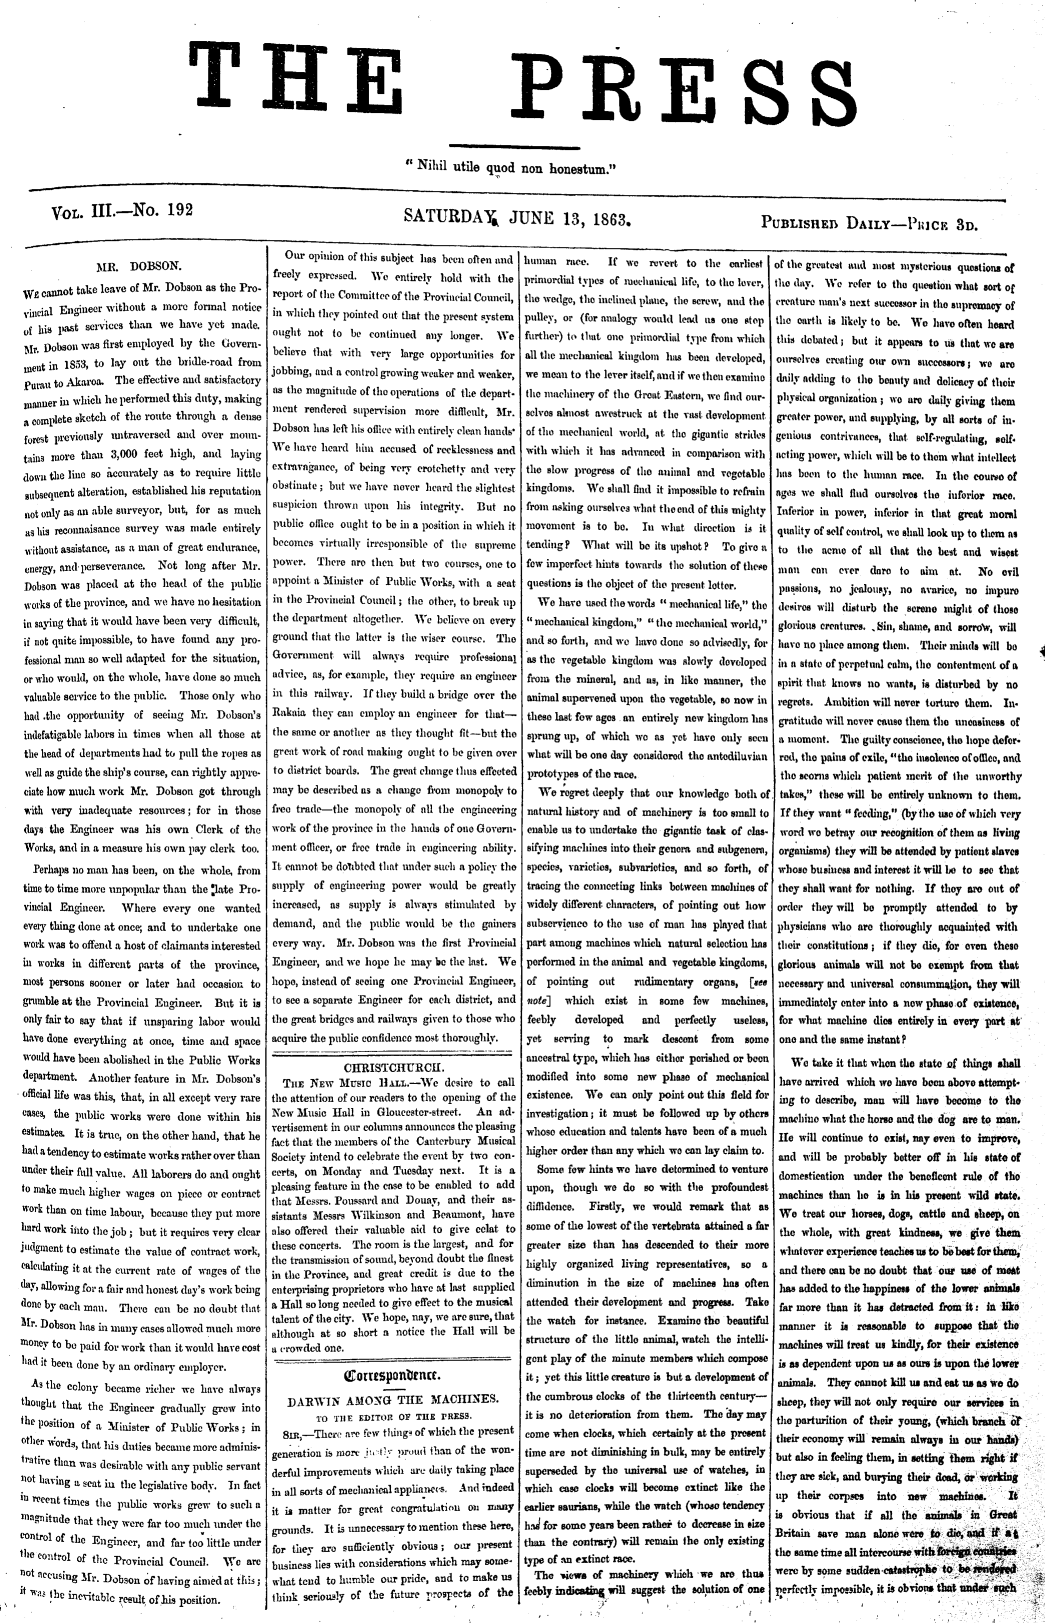 The front page of The Press newspaper from 13 June 1863. Butler’s letter Darwin Among The Machines starts at the bottom of the second column. The letter continued to the end of the first column of the second page (not shown).